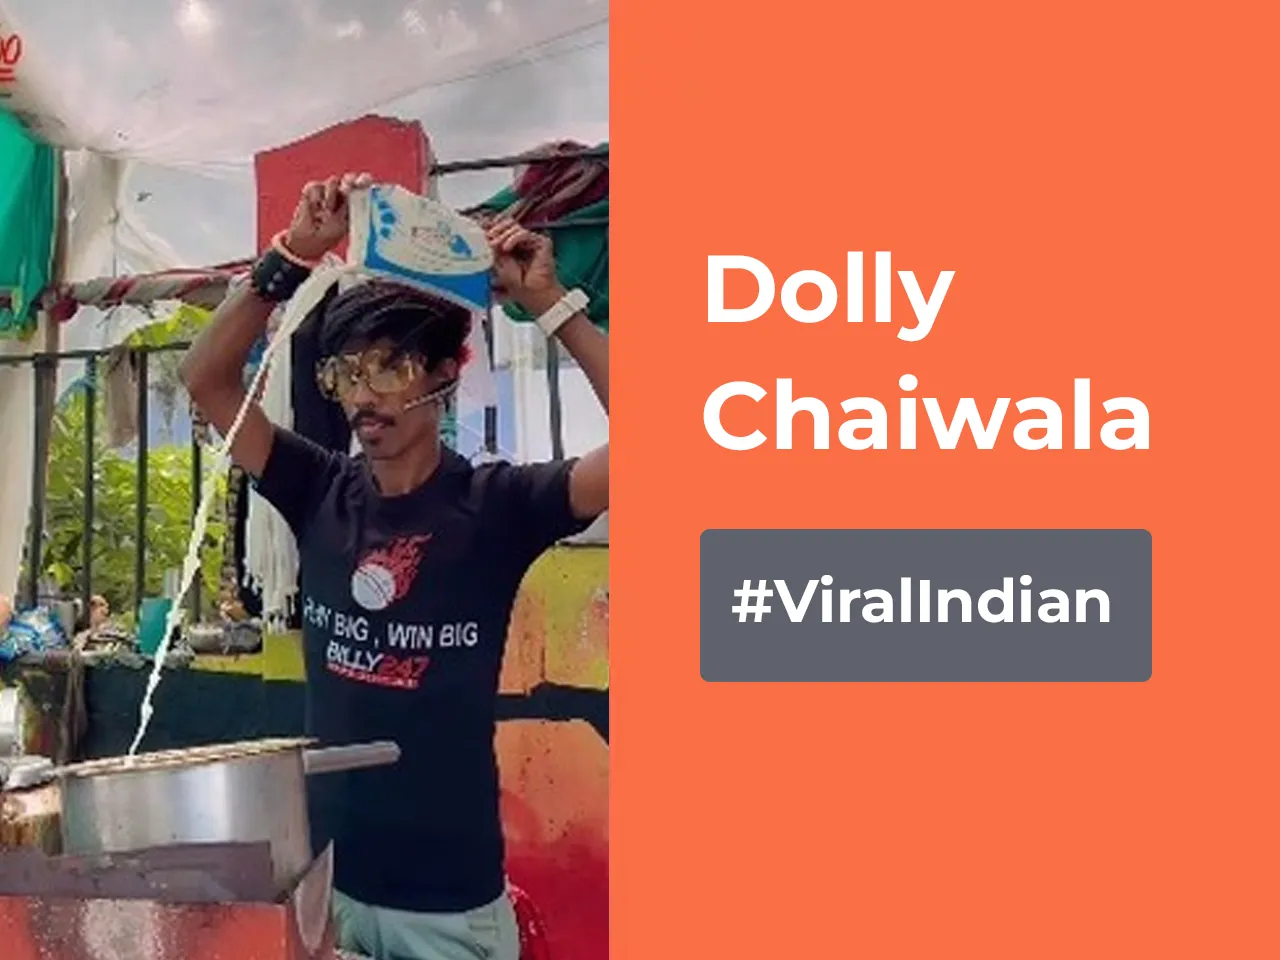 Viral Indians: Dolly Chaiwala has taken the internet by storm one cup at a time